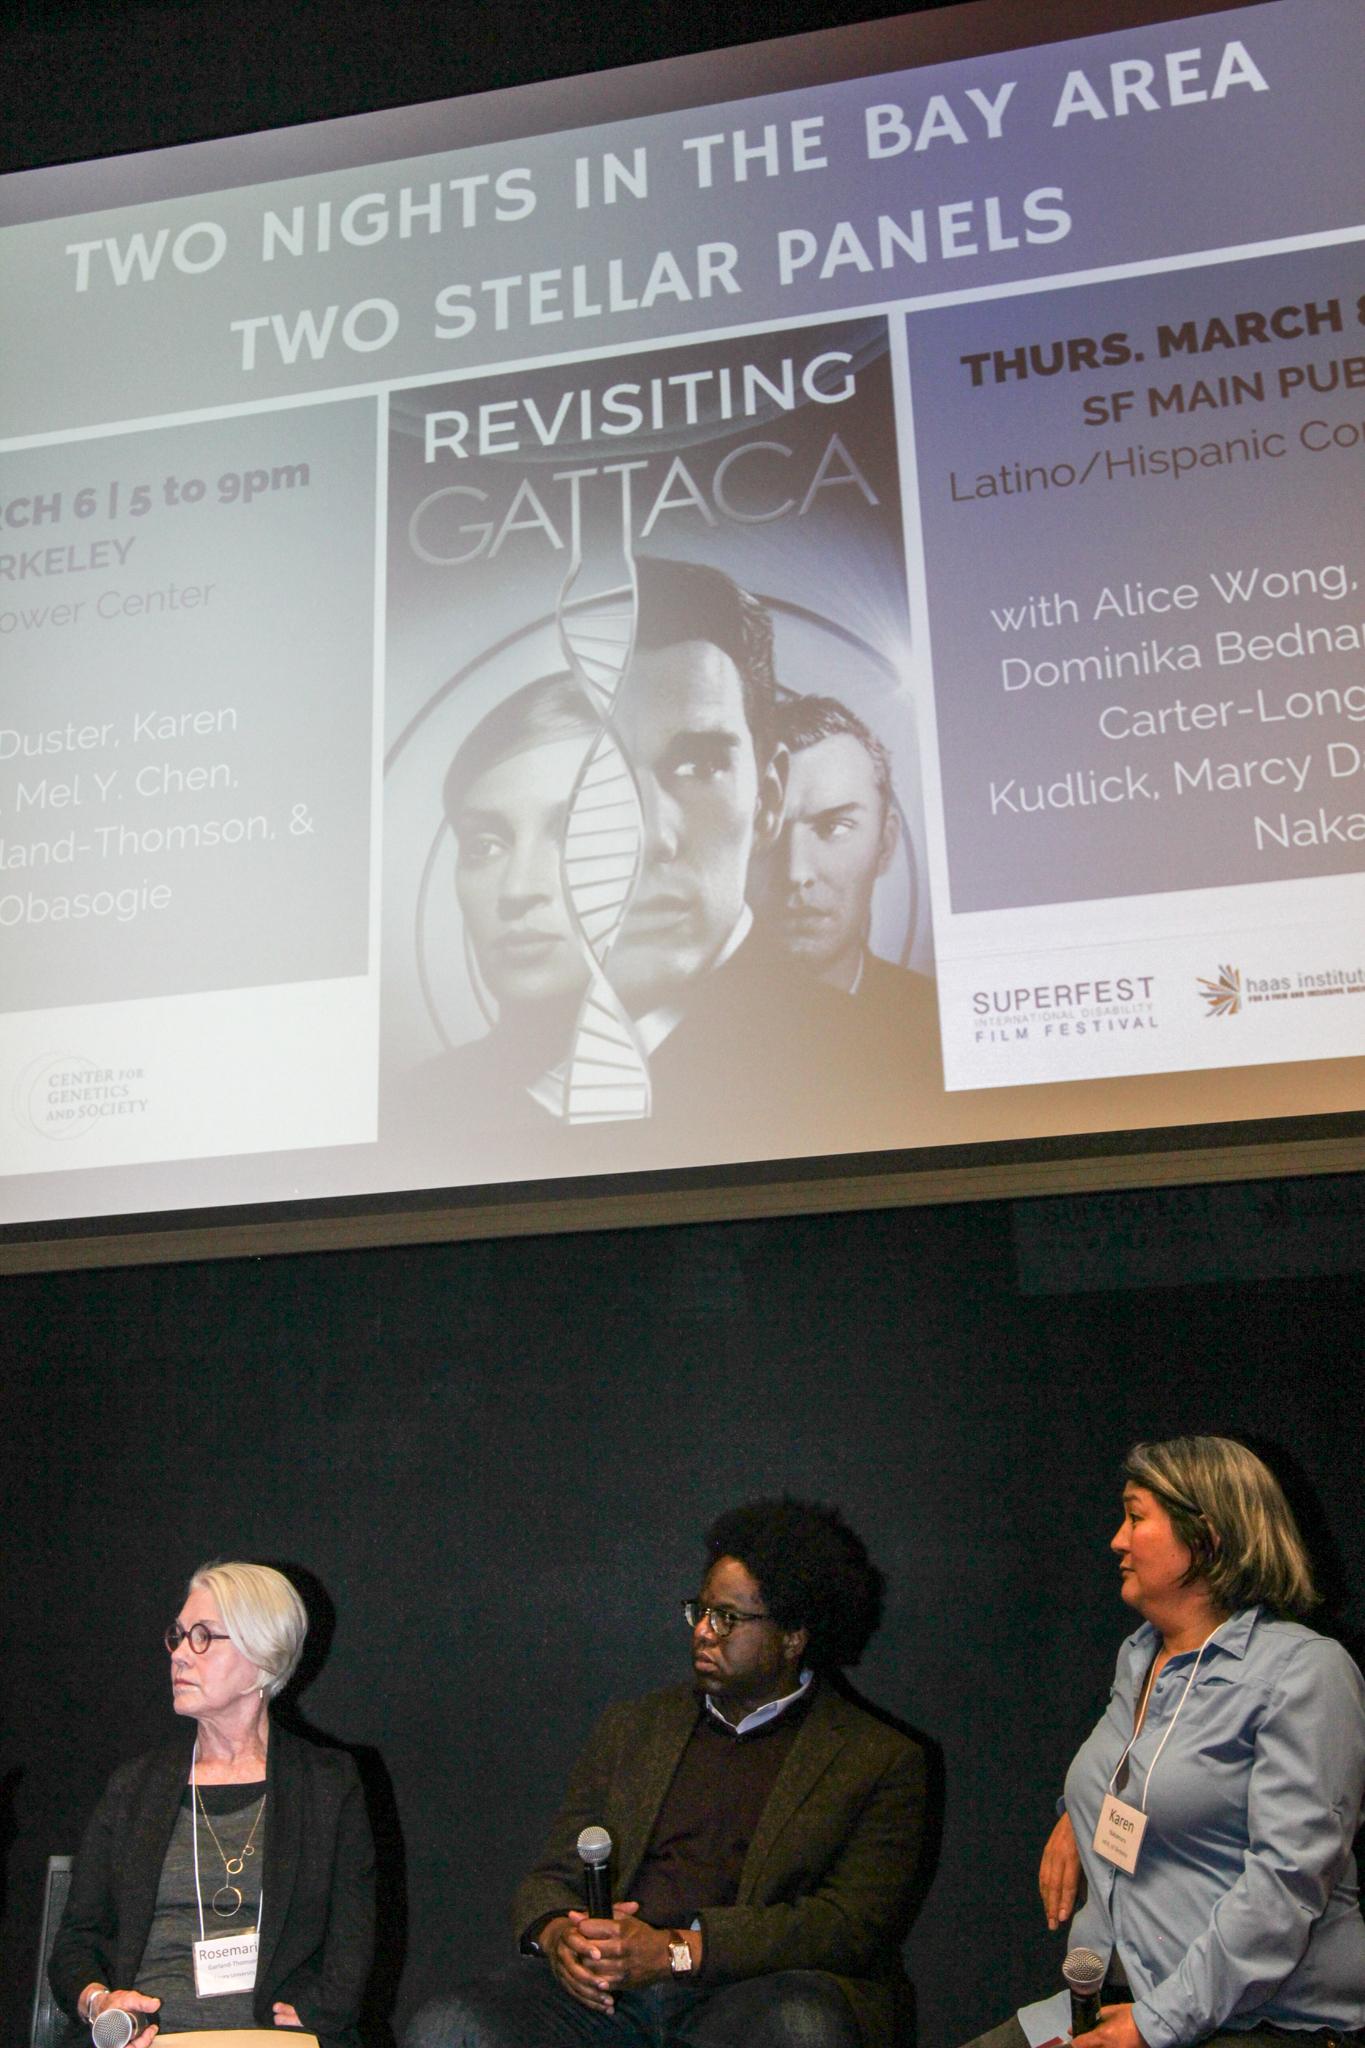 Panelists Rosemarie Garland-Thomson, Osagie Obasogie, and Karen Nakamura sit under a projected image that reads "TWO NIGHTS IN THE BAY AREA. TWO STELLAR PANELS." Below, the words "Revisiting GATTACA" are superimposed on the Gattaca movie poster, featuring the faces of Uma Thurman, Ethan Hawke, and Jude Law.